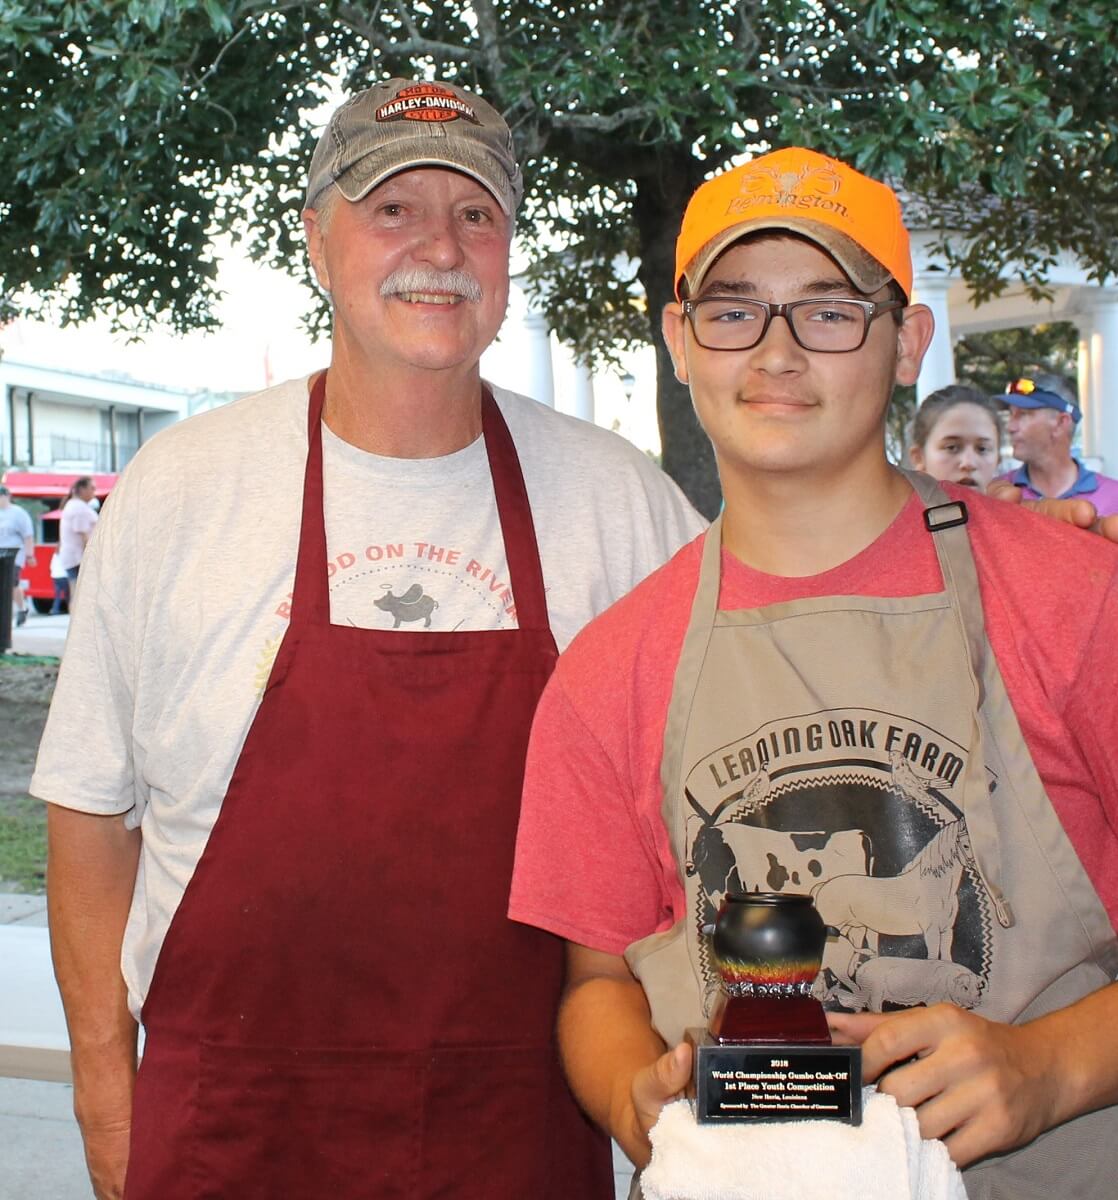 Kernis Louviere with youth representing Leaning Oak Farm at World Championship Gumbo Cookoff Youth Gumbo Competition